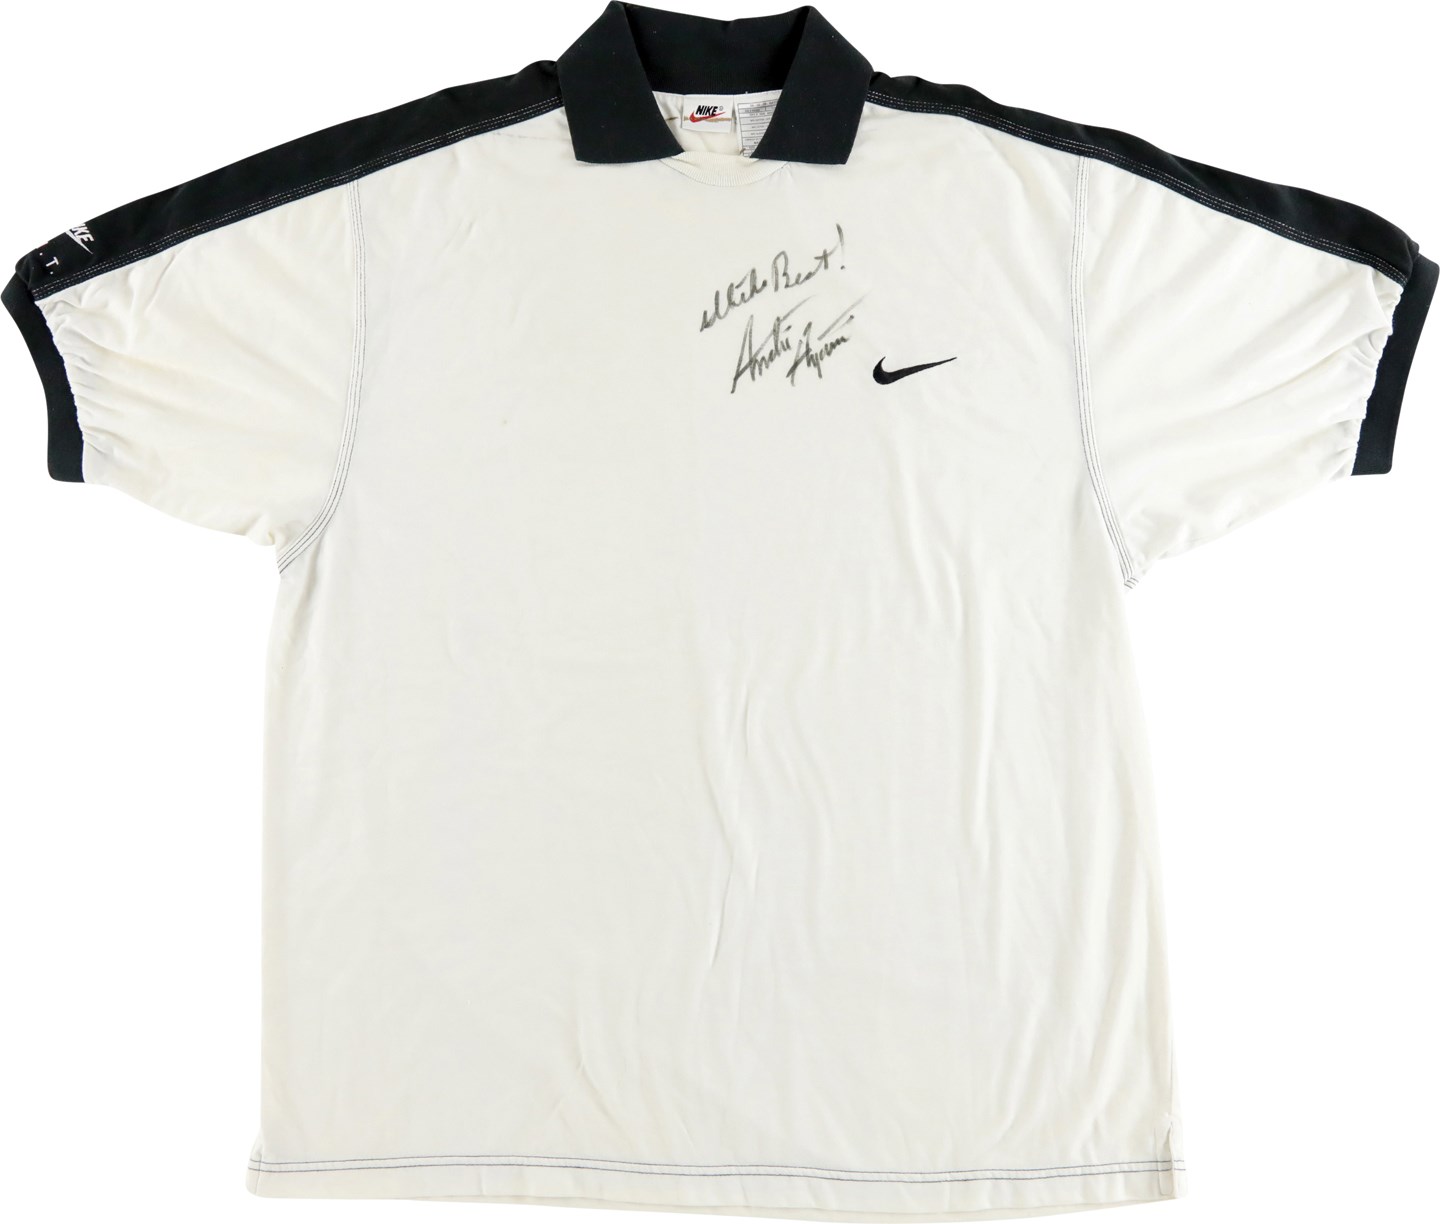 - 1996 Andre Agassi Signed Match Worn Shirt Attributed to Australian Open Match vs. Jim Courier (PSA & Possible Photo-Match)